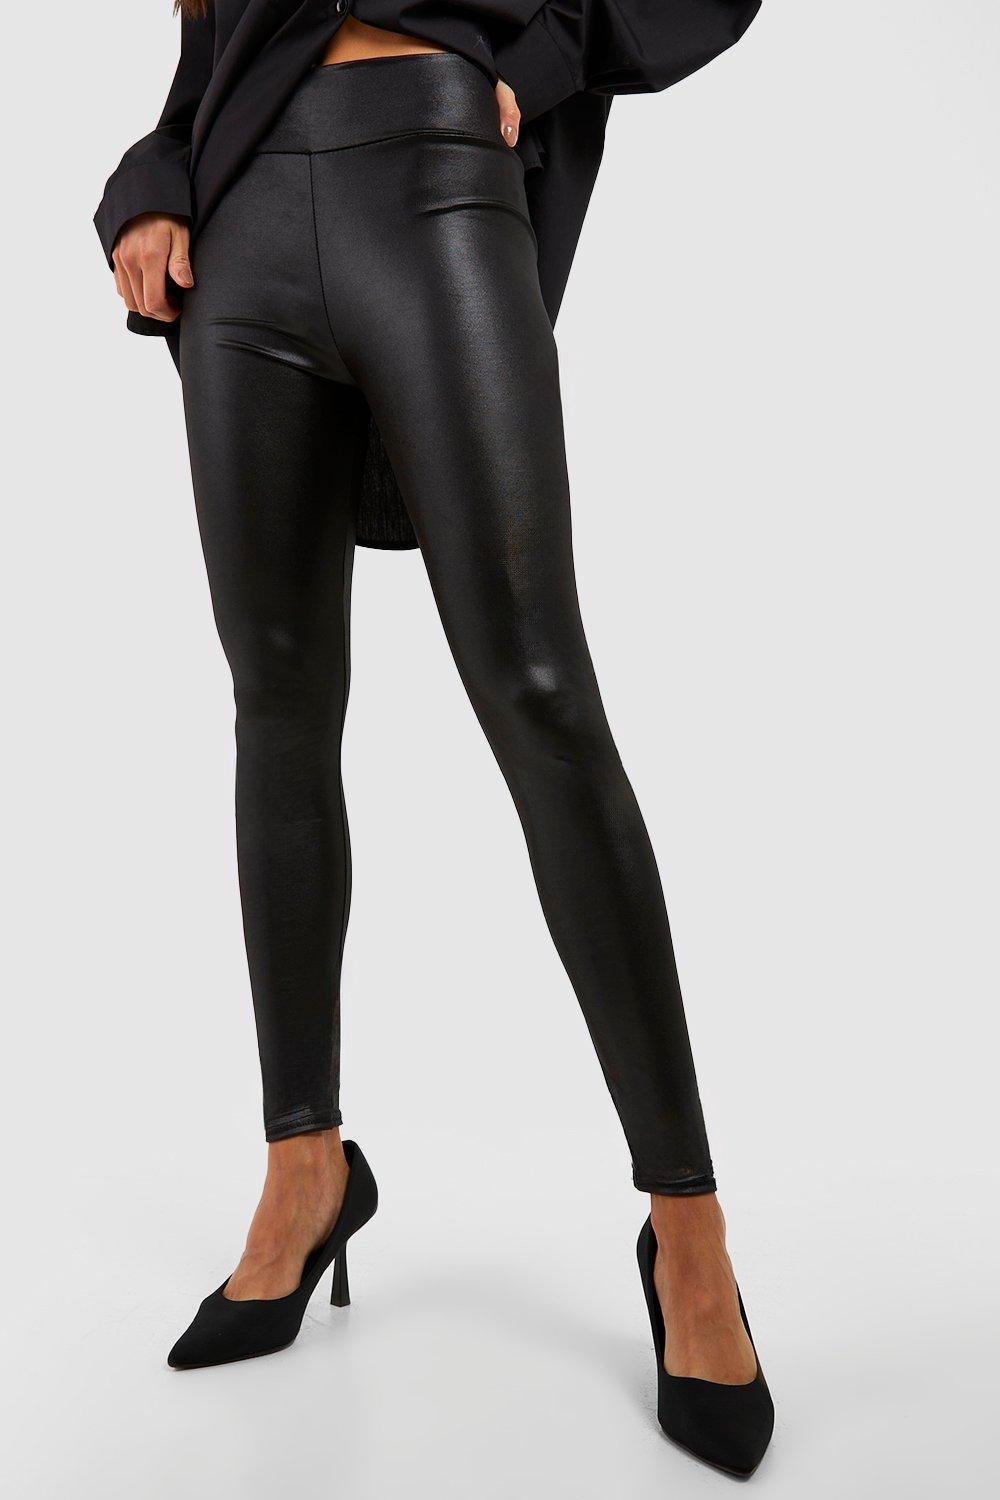 Spanx - Faux Patent Leather Leggings - Blue Jeans and Bikinis Boutique